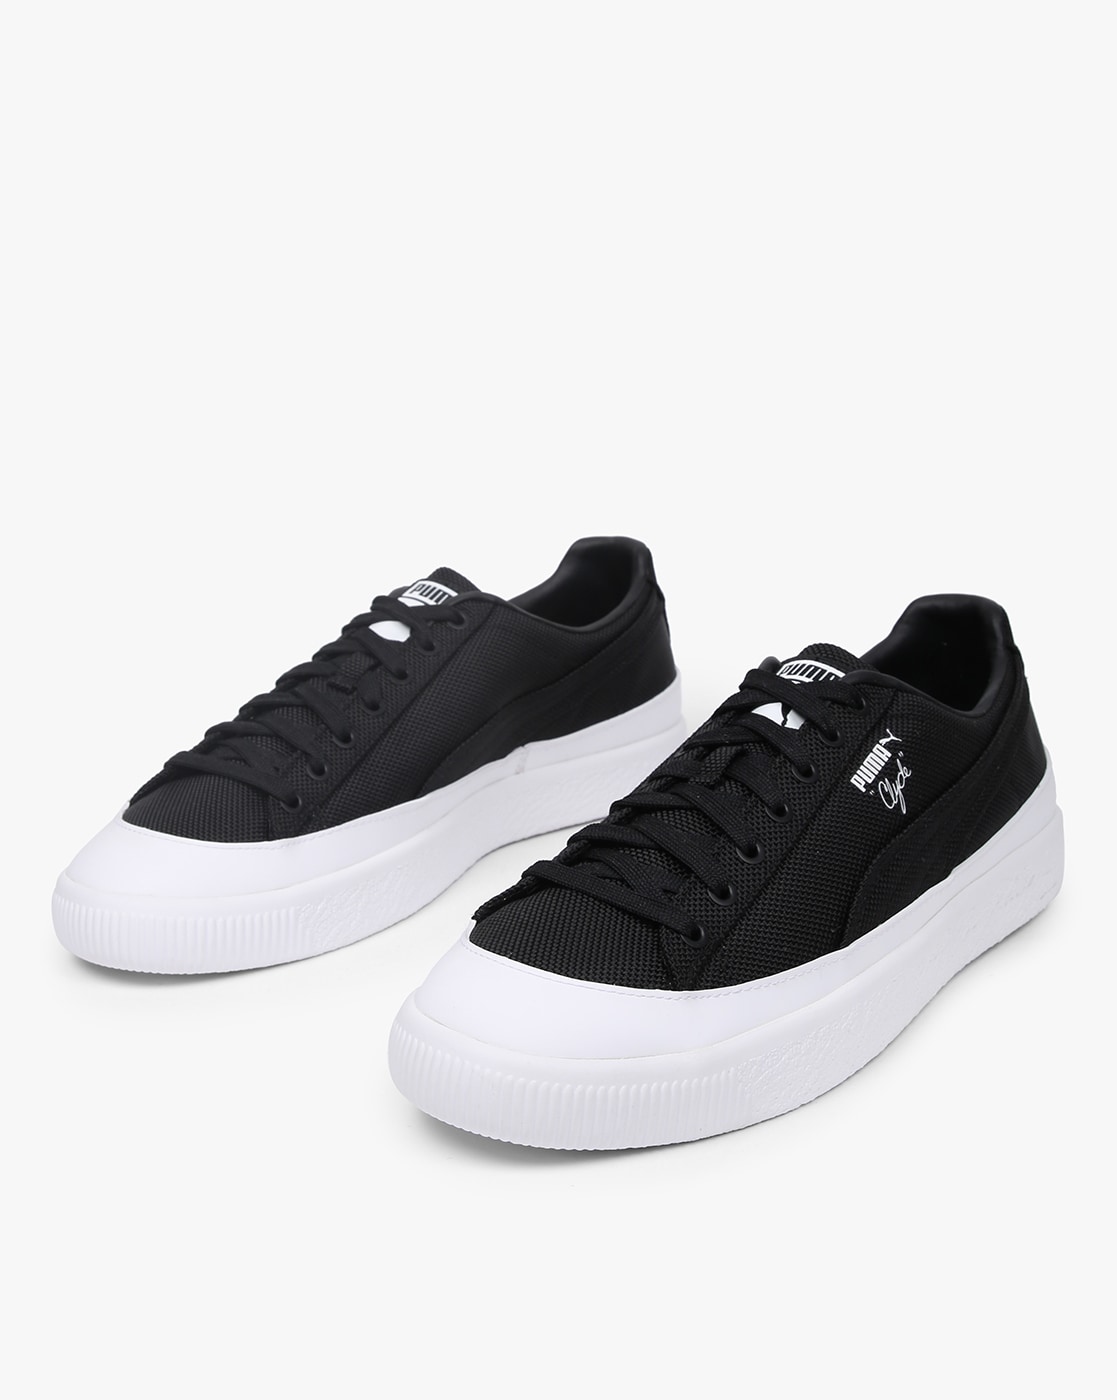 puma clyde rubber toe leather